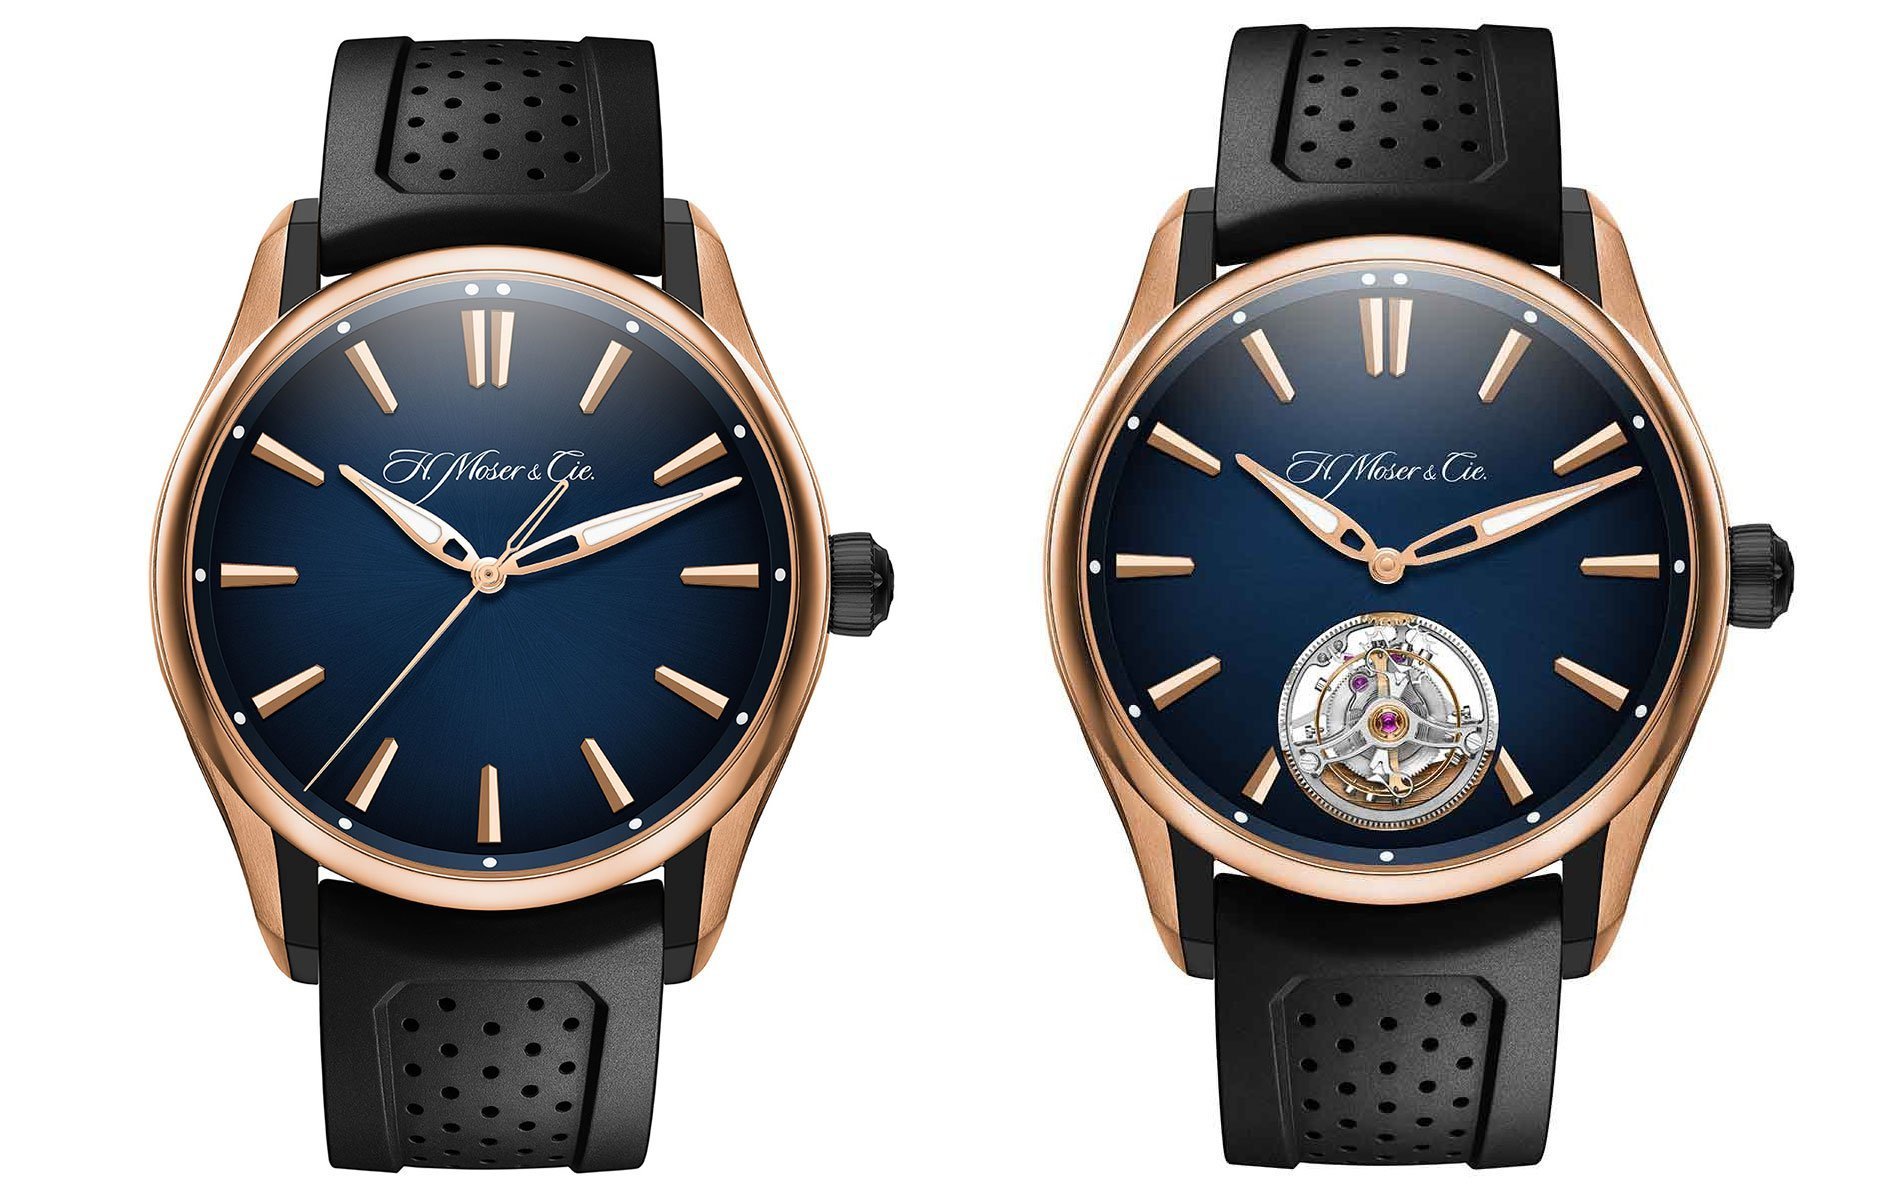 H. MOSER & CIE. INTRODUCES TWO ALL-TERRAIN MODELS WITH STURDY CHARACTER